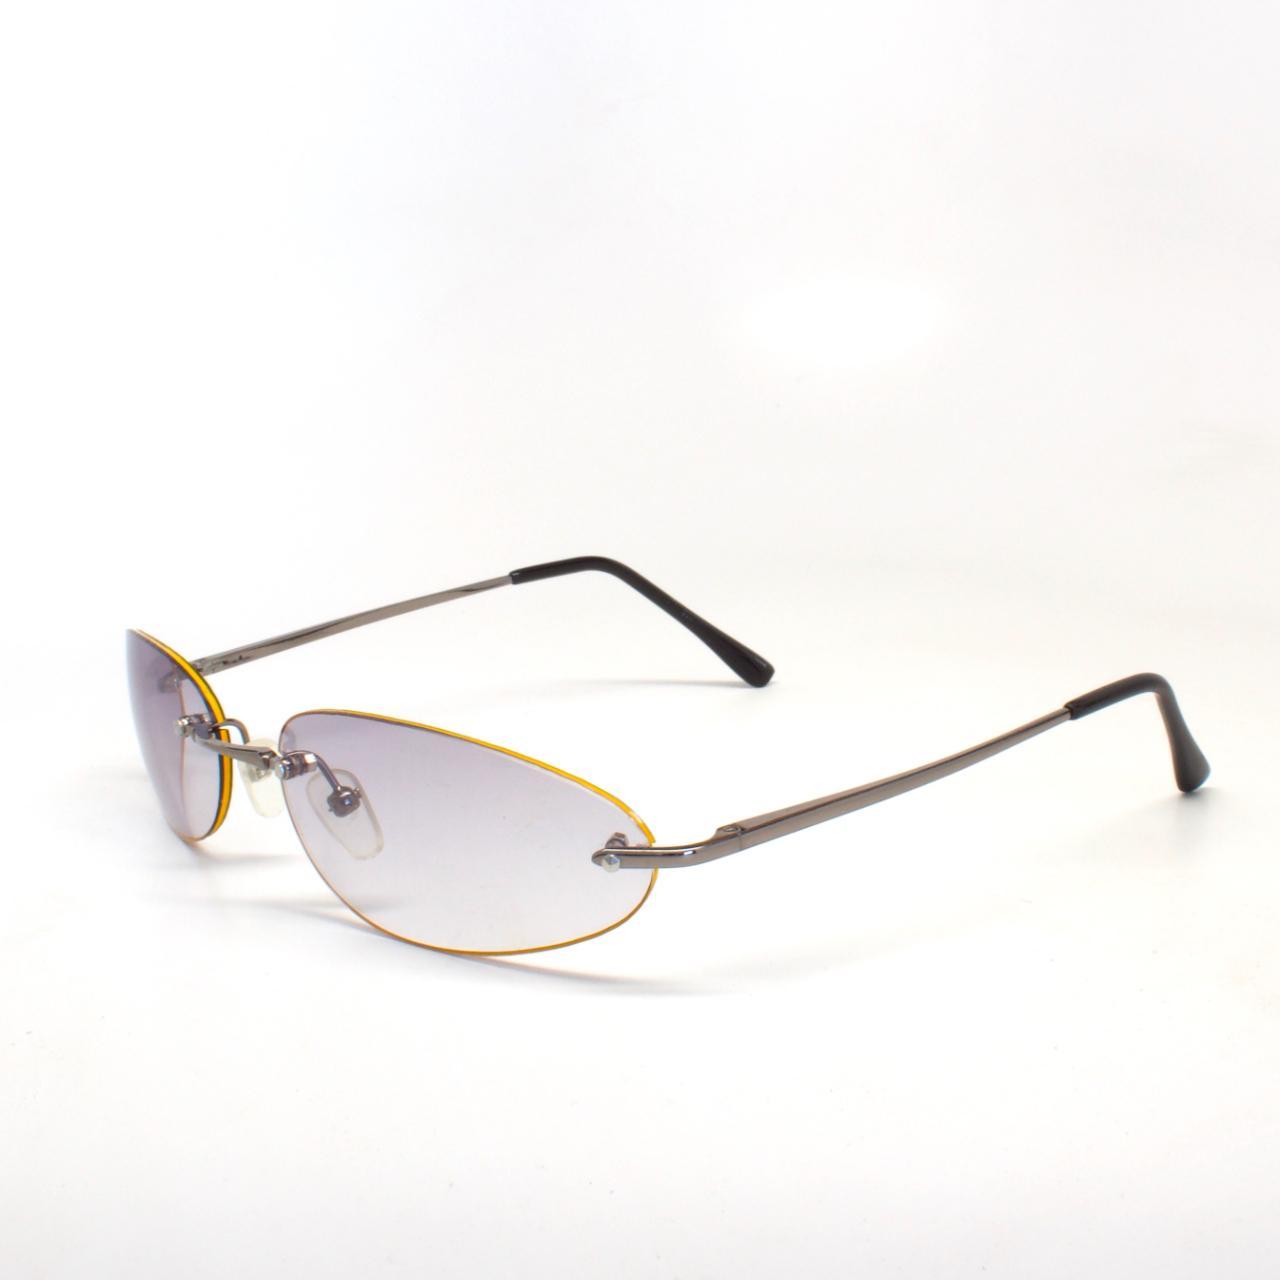 Authentic Y2K Vintage Rimless Yellow Oval Sunglasses - Depop